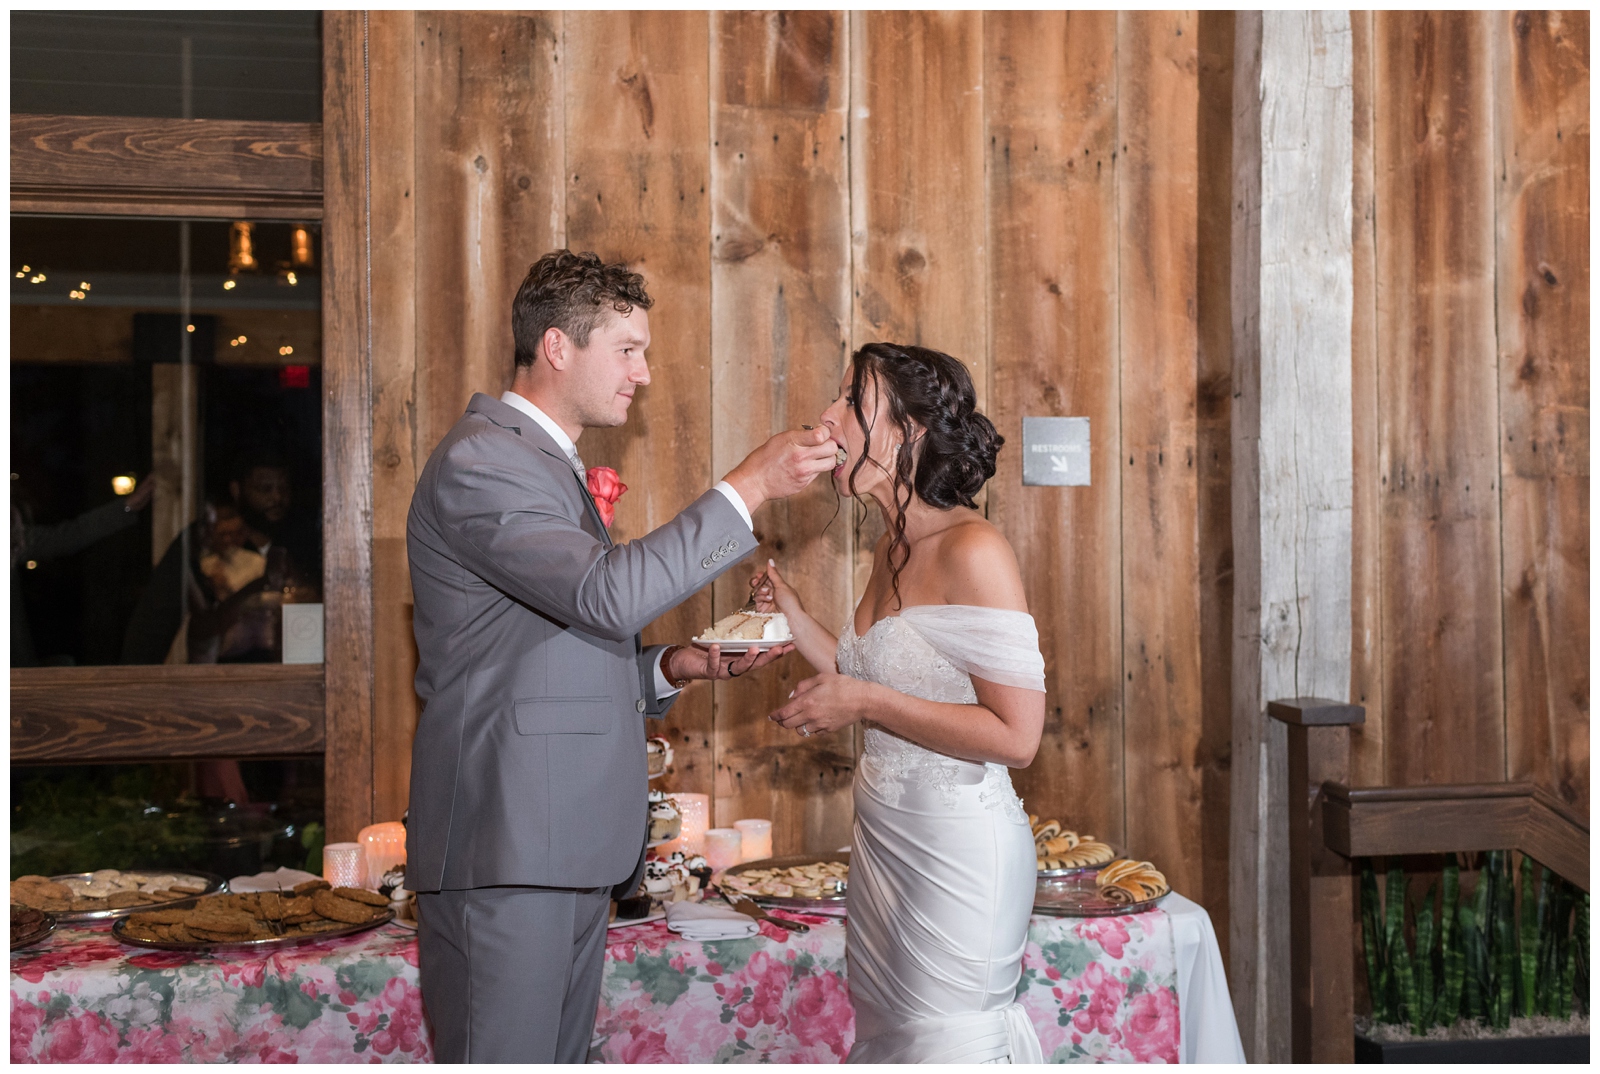 groom feeds bride a bite of wedding cake during reception at The Wells Barn